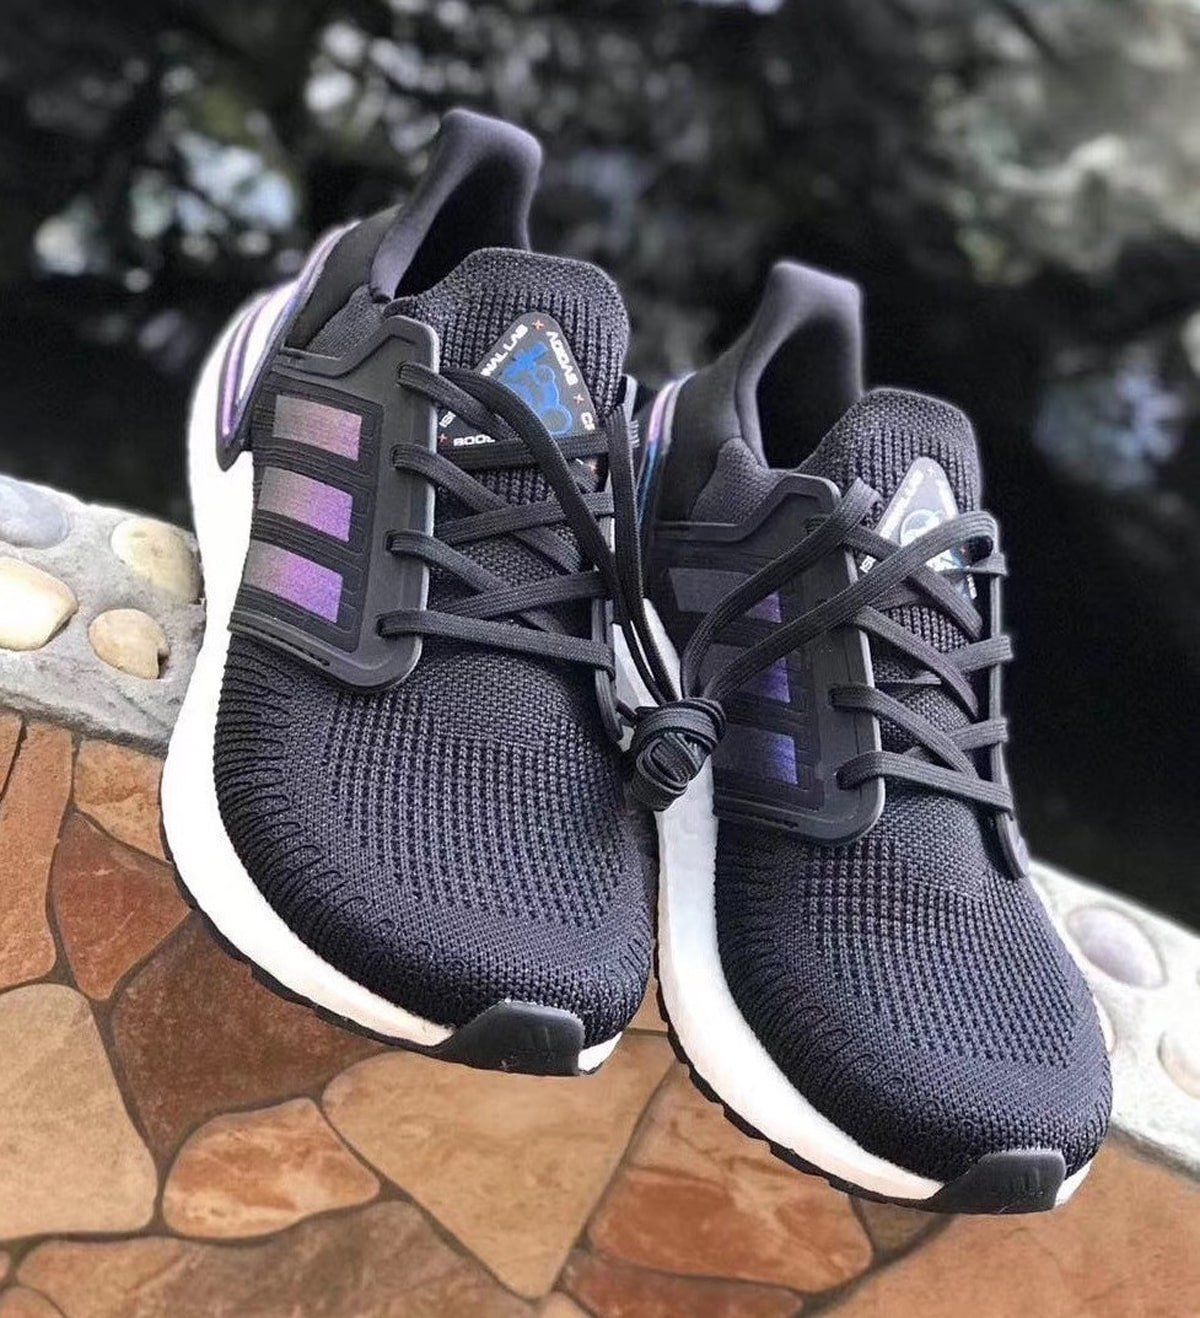 Rub Monotonous technical adidas Ultra BOOST 2020 Surfaces in New Colorways | HOUSE OF HEAT